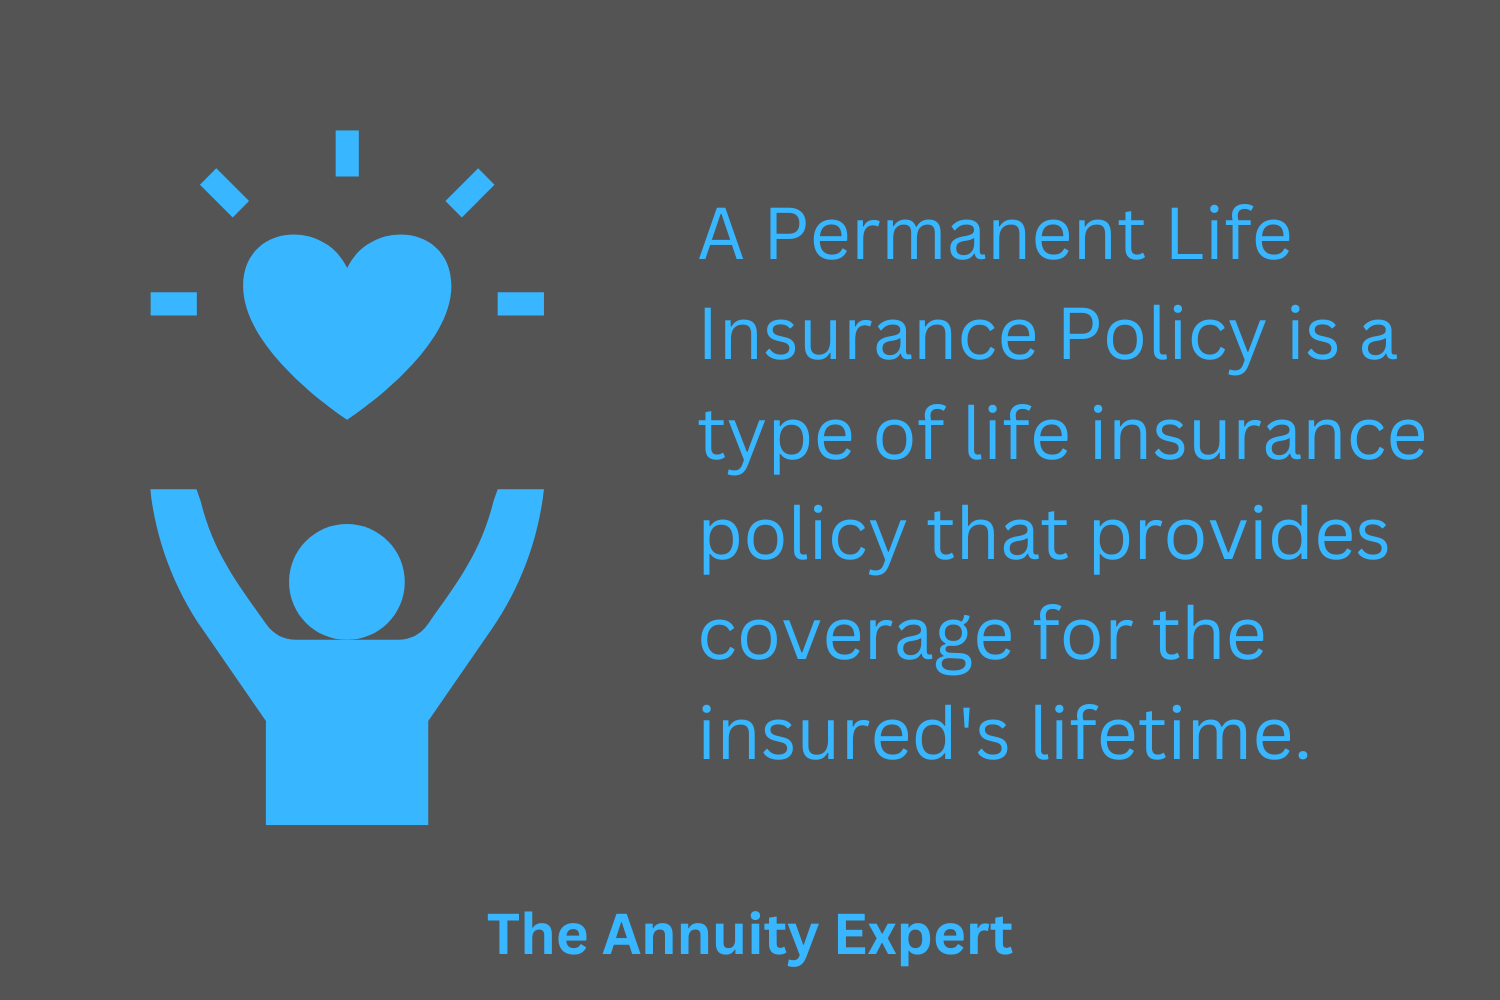 What Is A Permanent Life Insurance Policy?